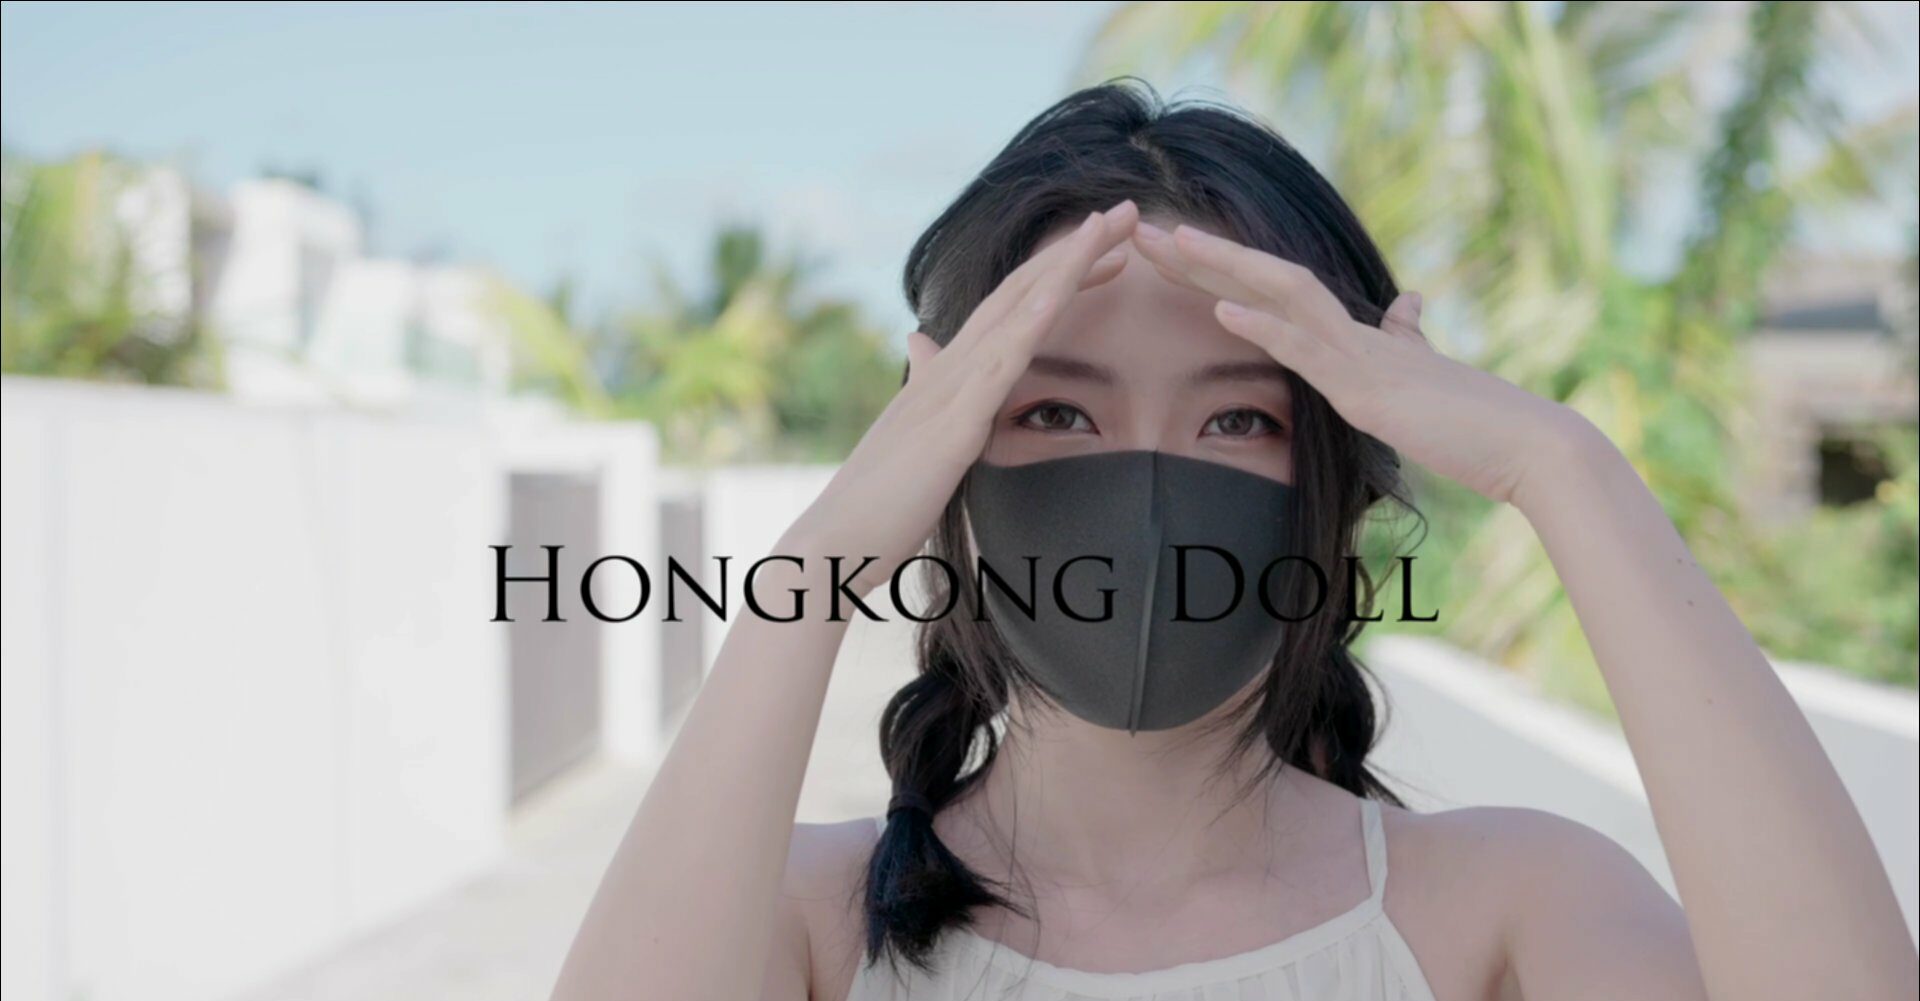 Overview of Hong Kong Doll